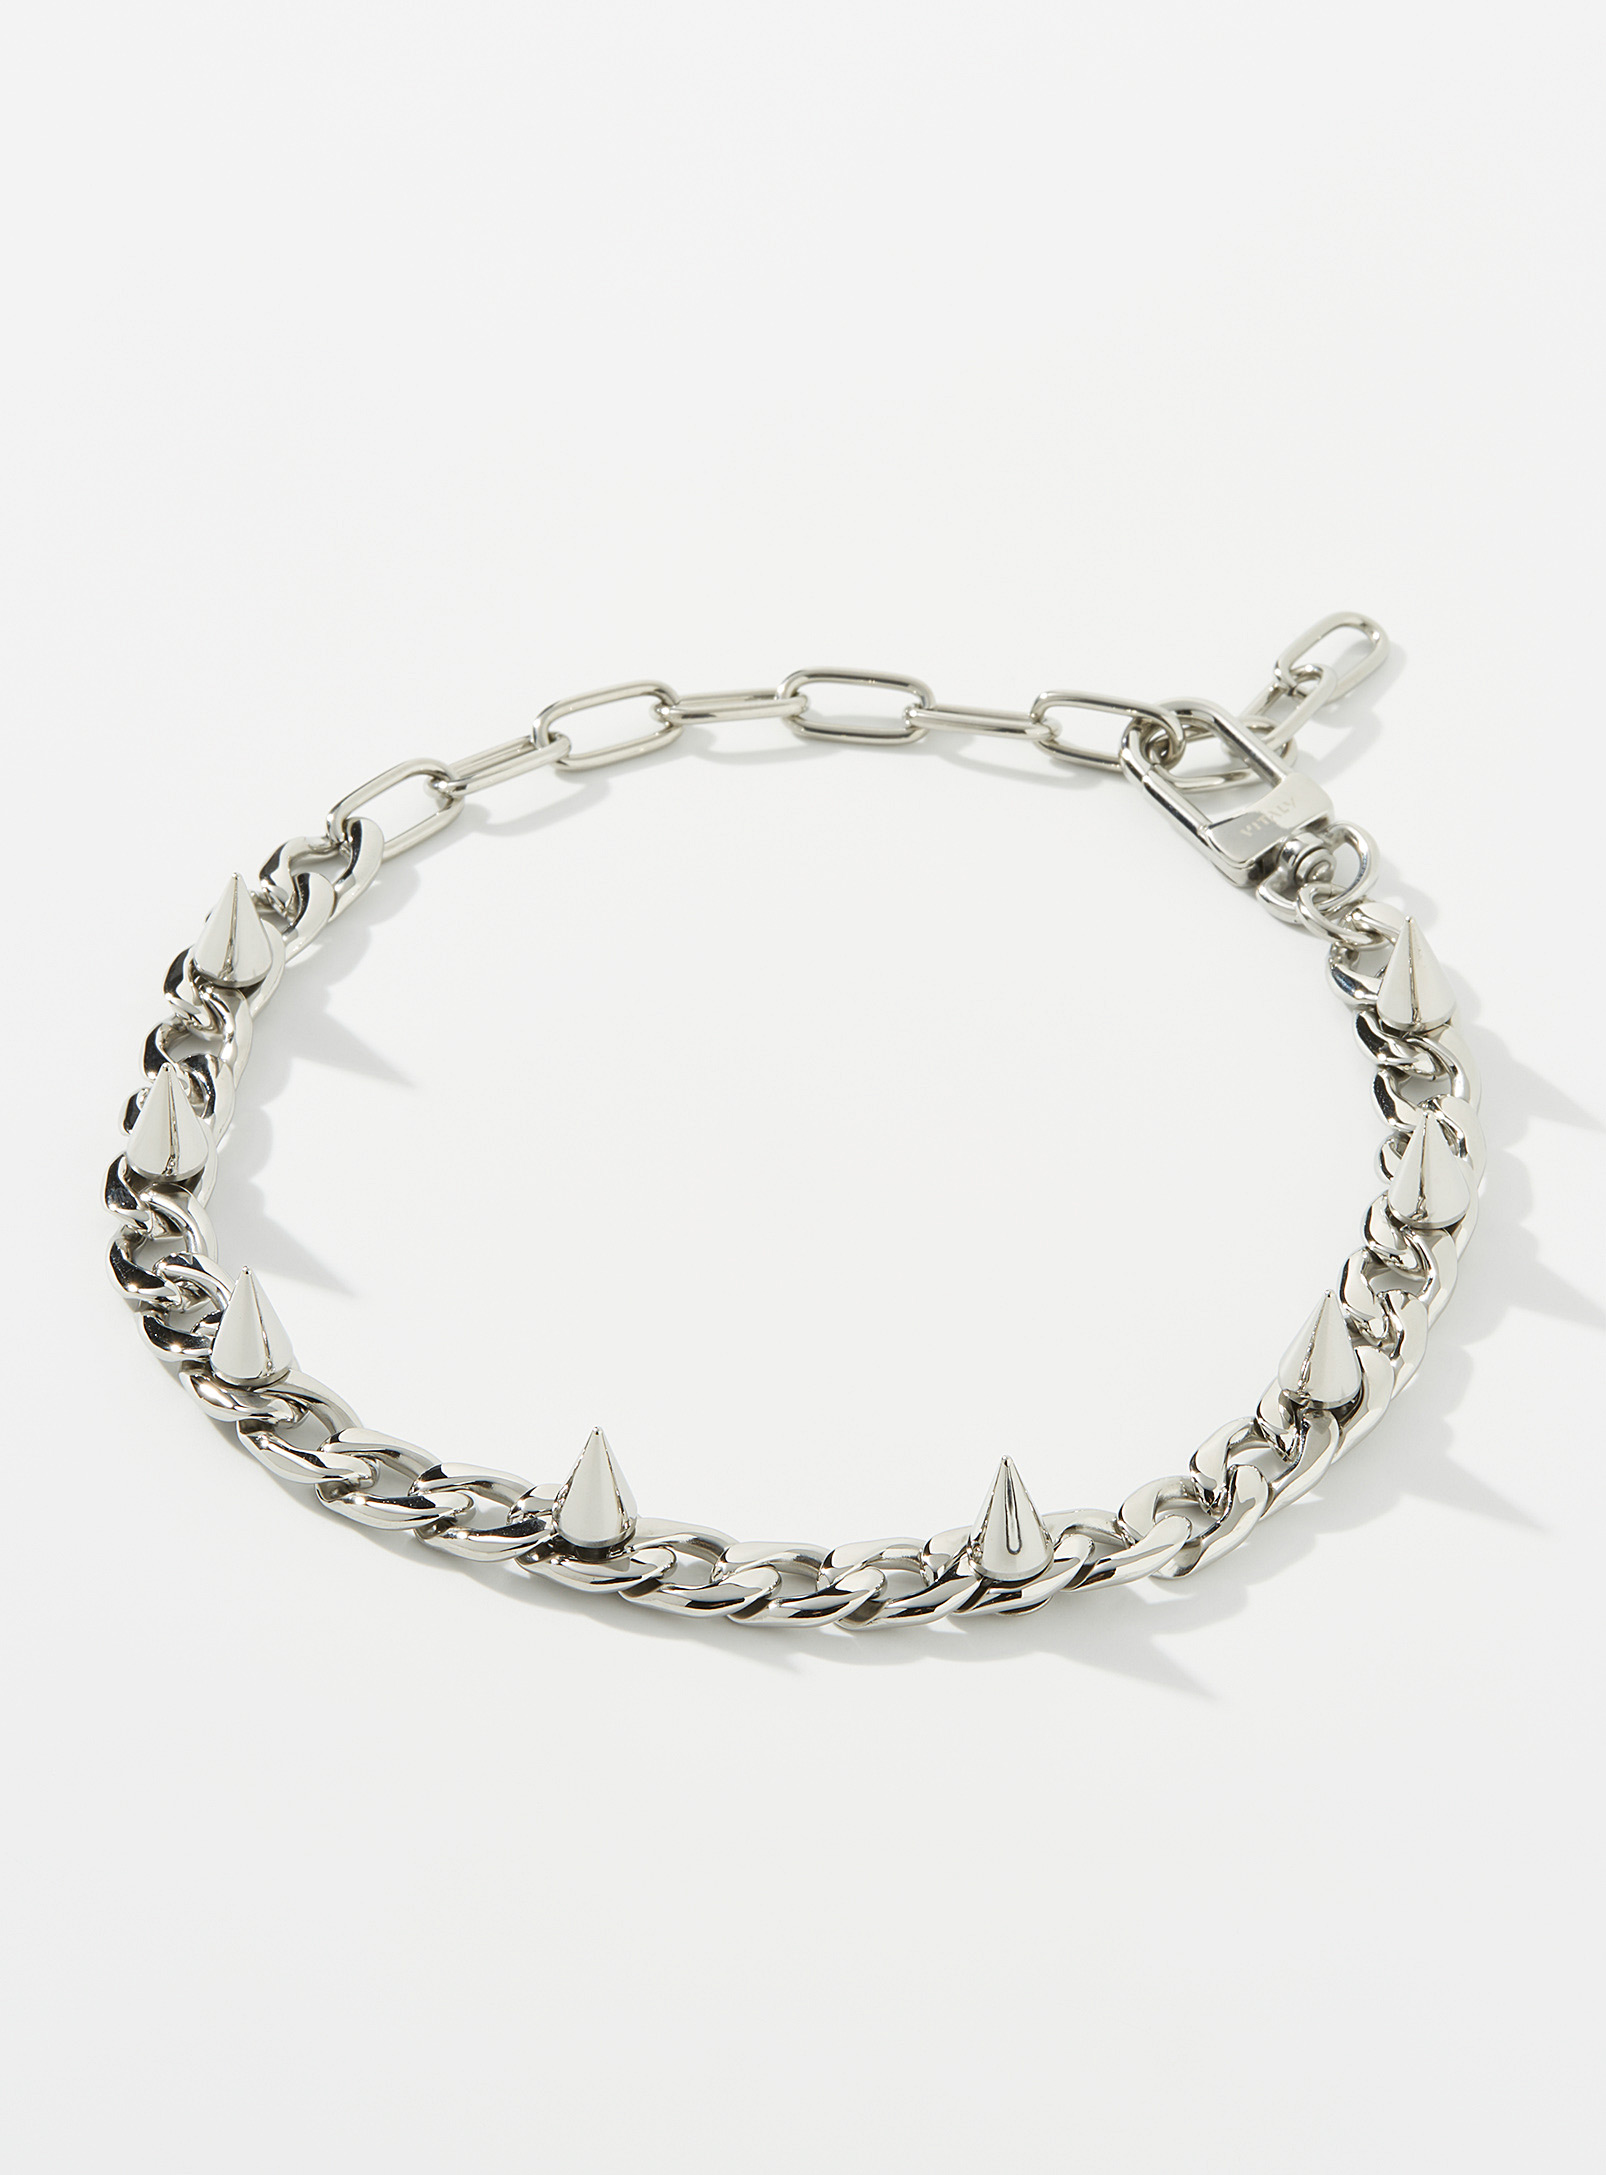 Vitaly - Men's Frenzy chain necklace